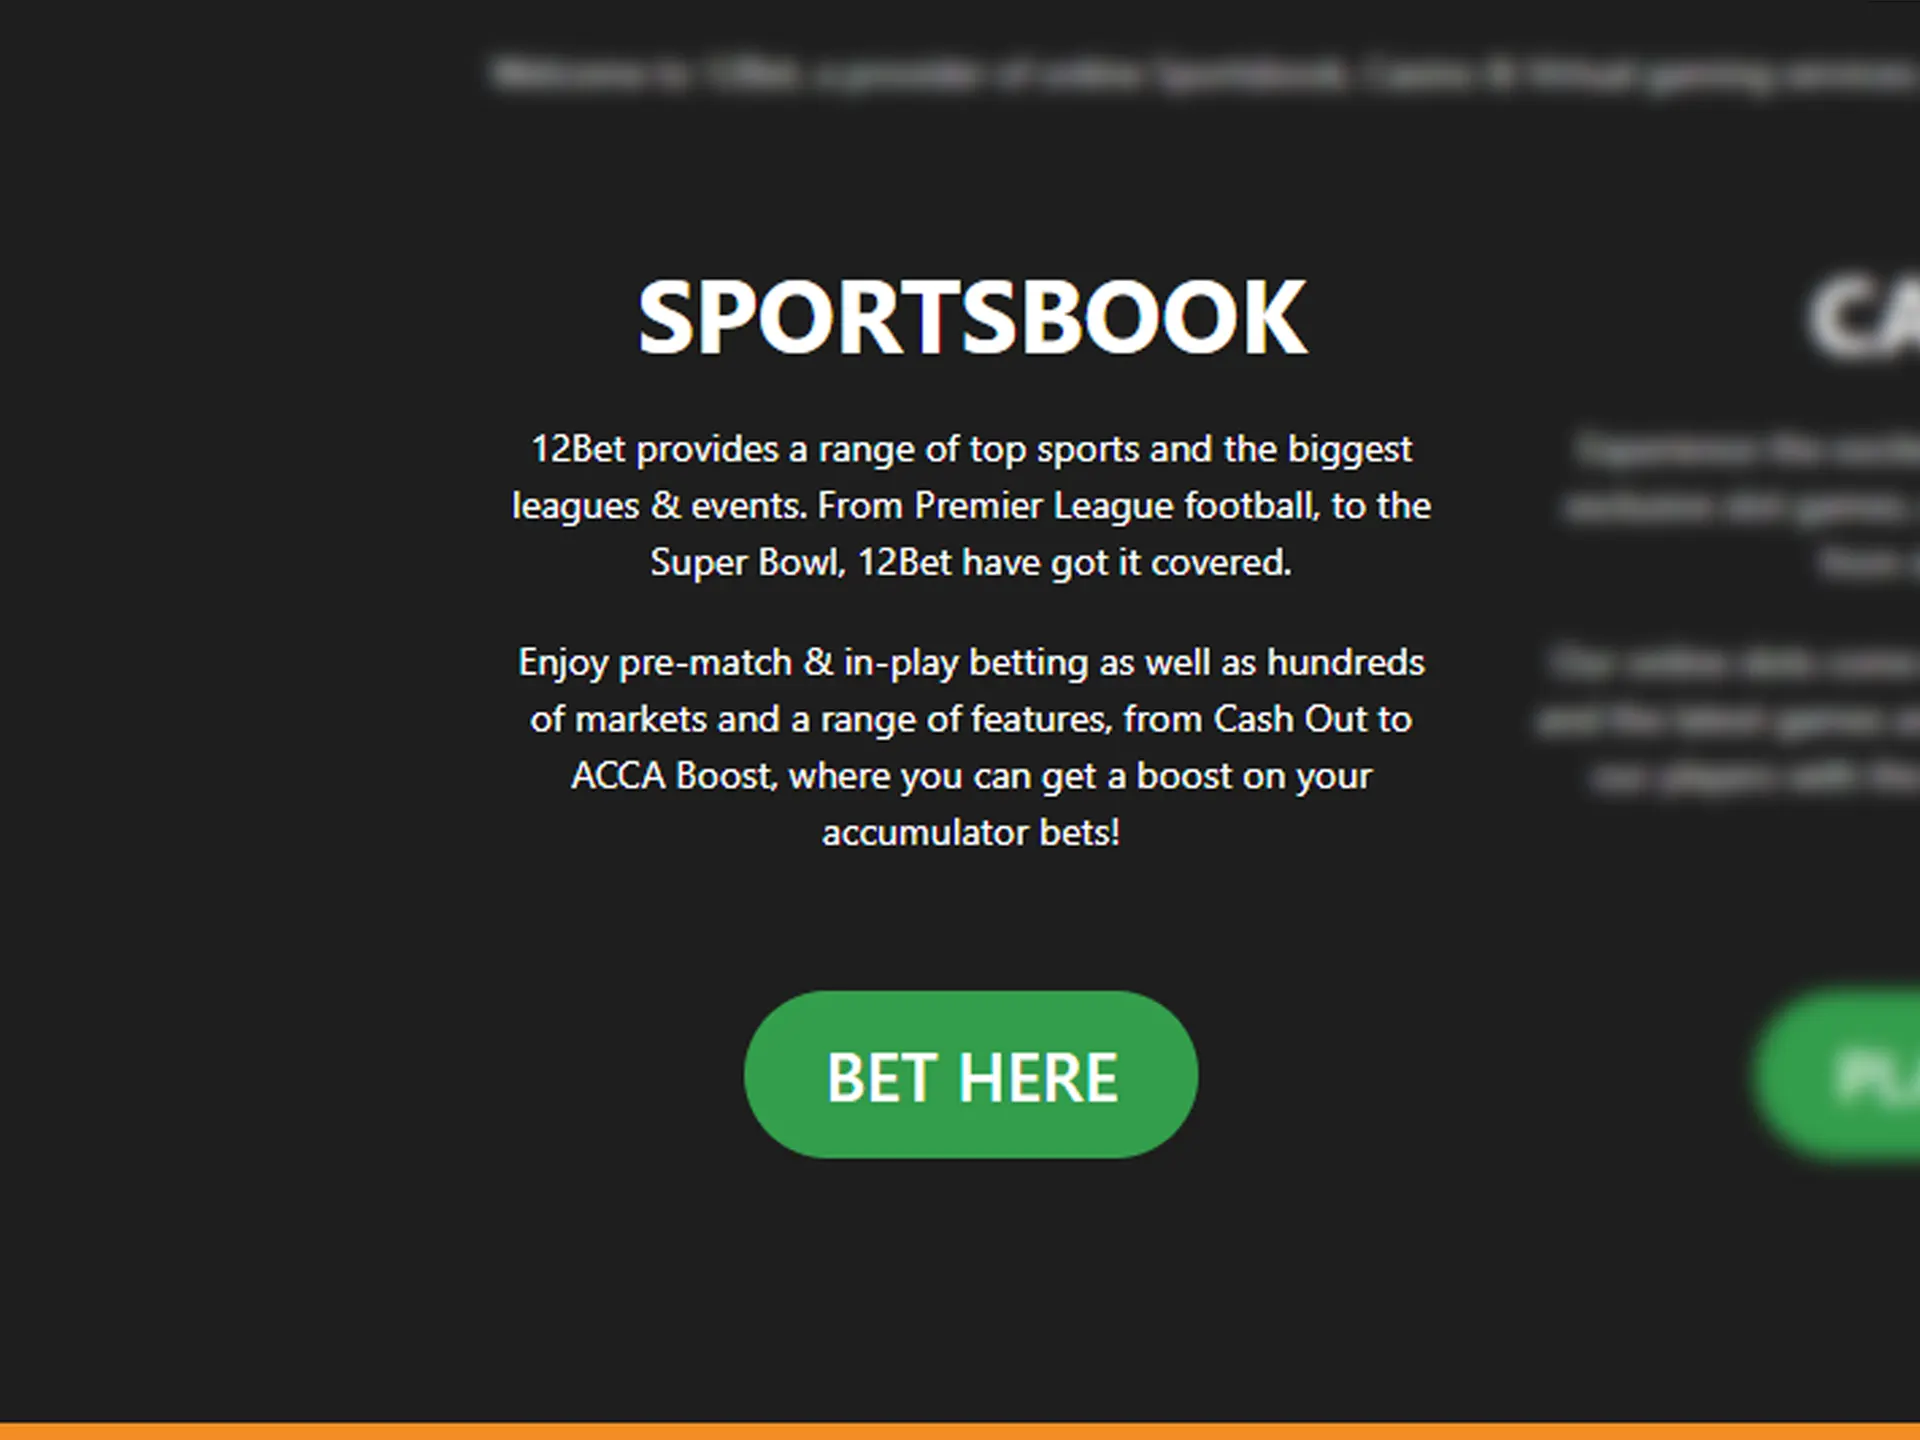 Search for sports page button.